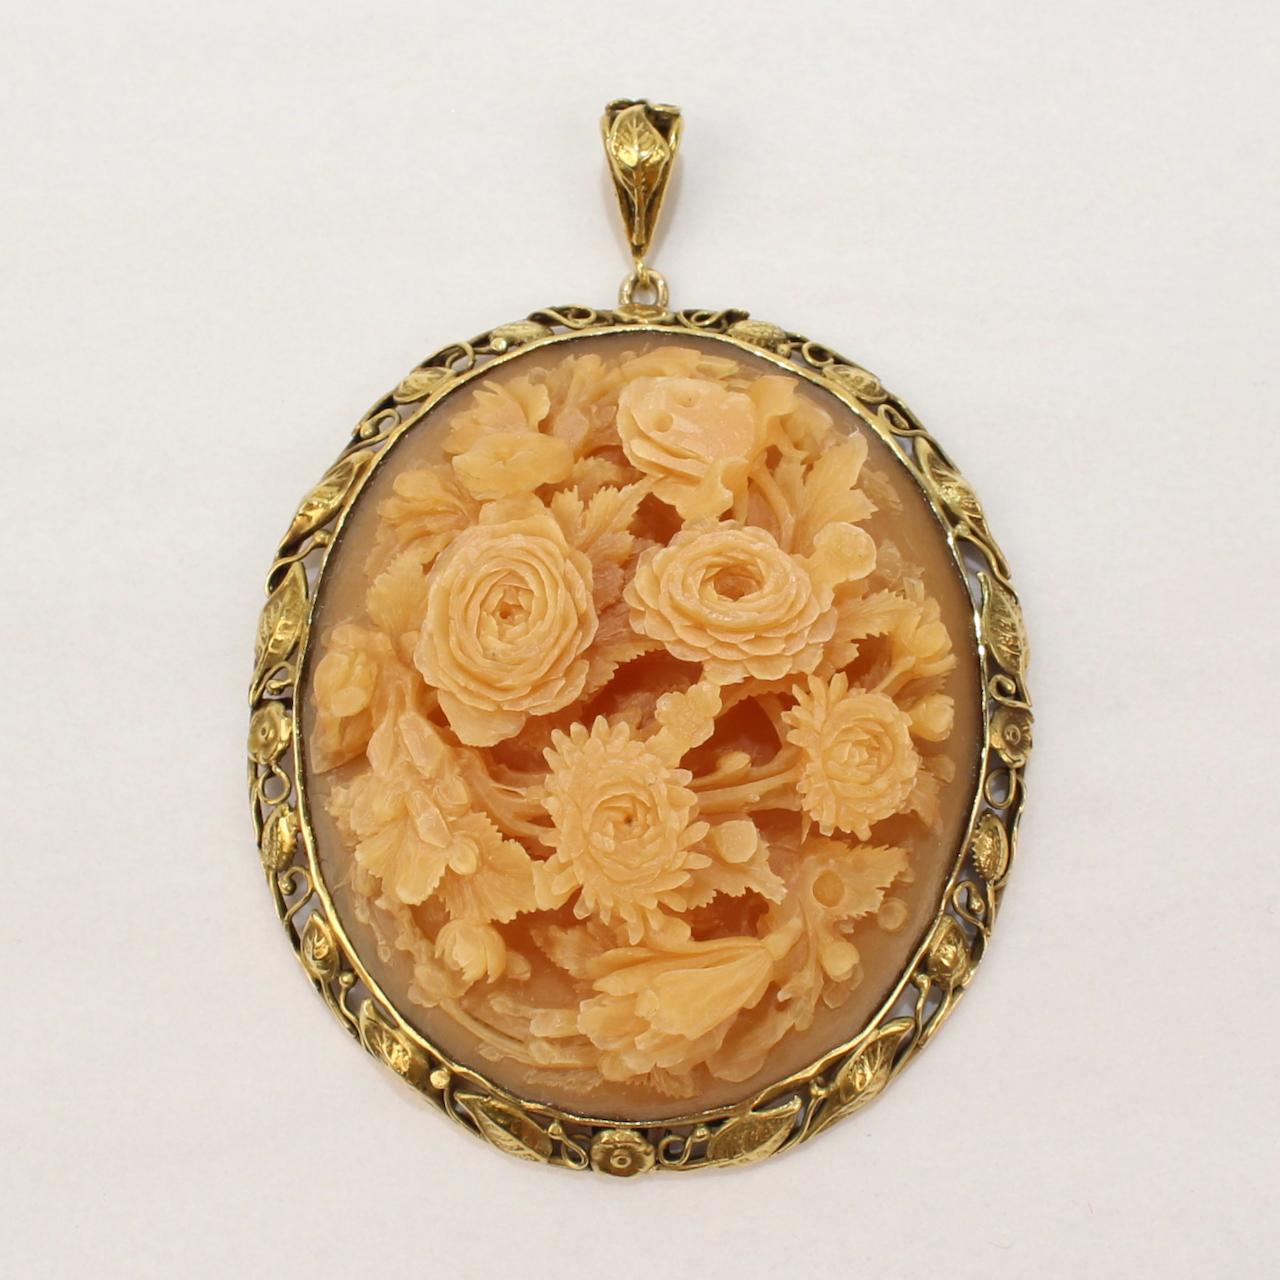 A very fine large hand relief carved horn pendant.

With a three dimensional bouquet of flowers that is bezel set in 14k gold. The setting has a leaf and flowers pattern.

We think that this is likely of Chinese origin and from the early to mid 20th